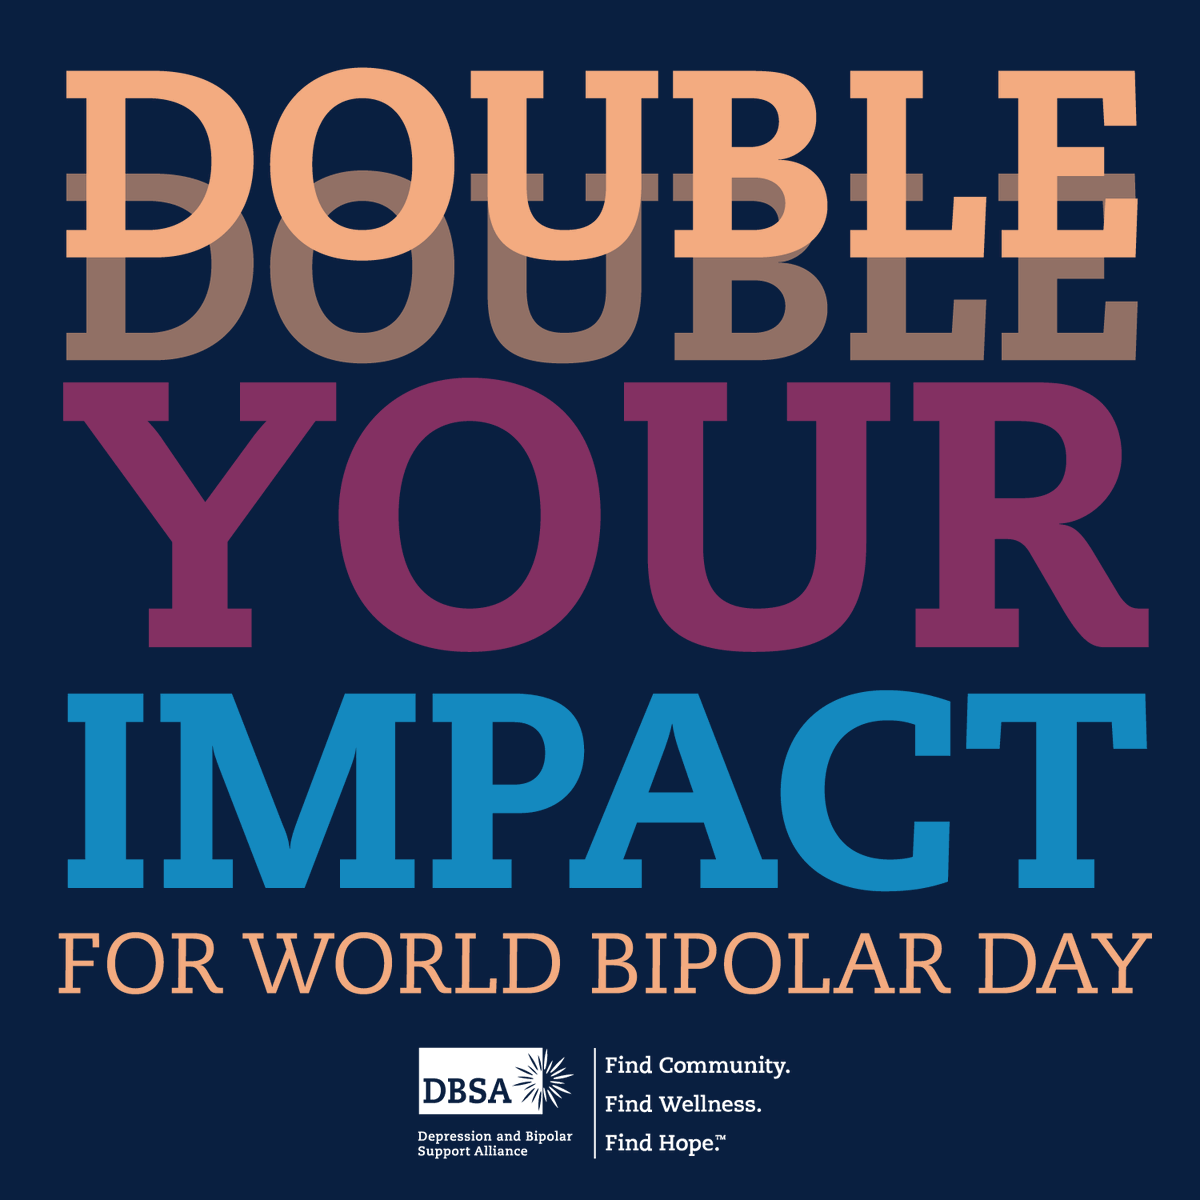 Eliminating stereotypes, discrimination, treatment barriers, and misunderstanding surrounding bipolar disorder is a shared mission. Thru March 30, your contribution will be matched $ for $ by a generous board member, doubling the impact of your support. bit.ly/3TrLmCh